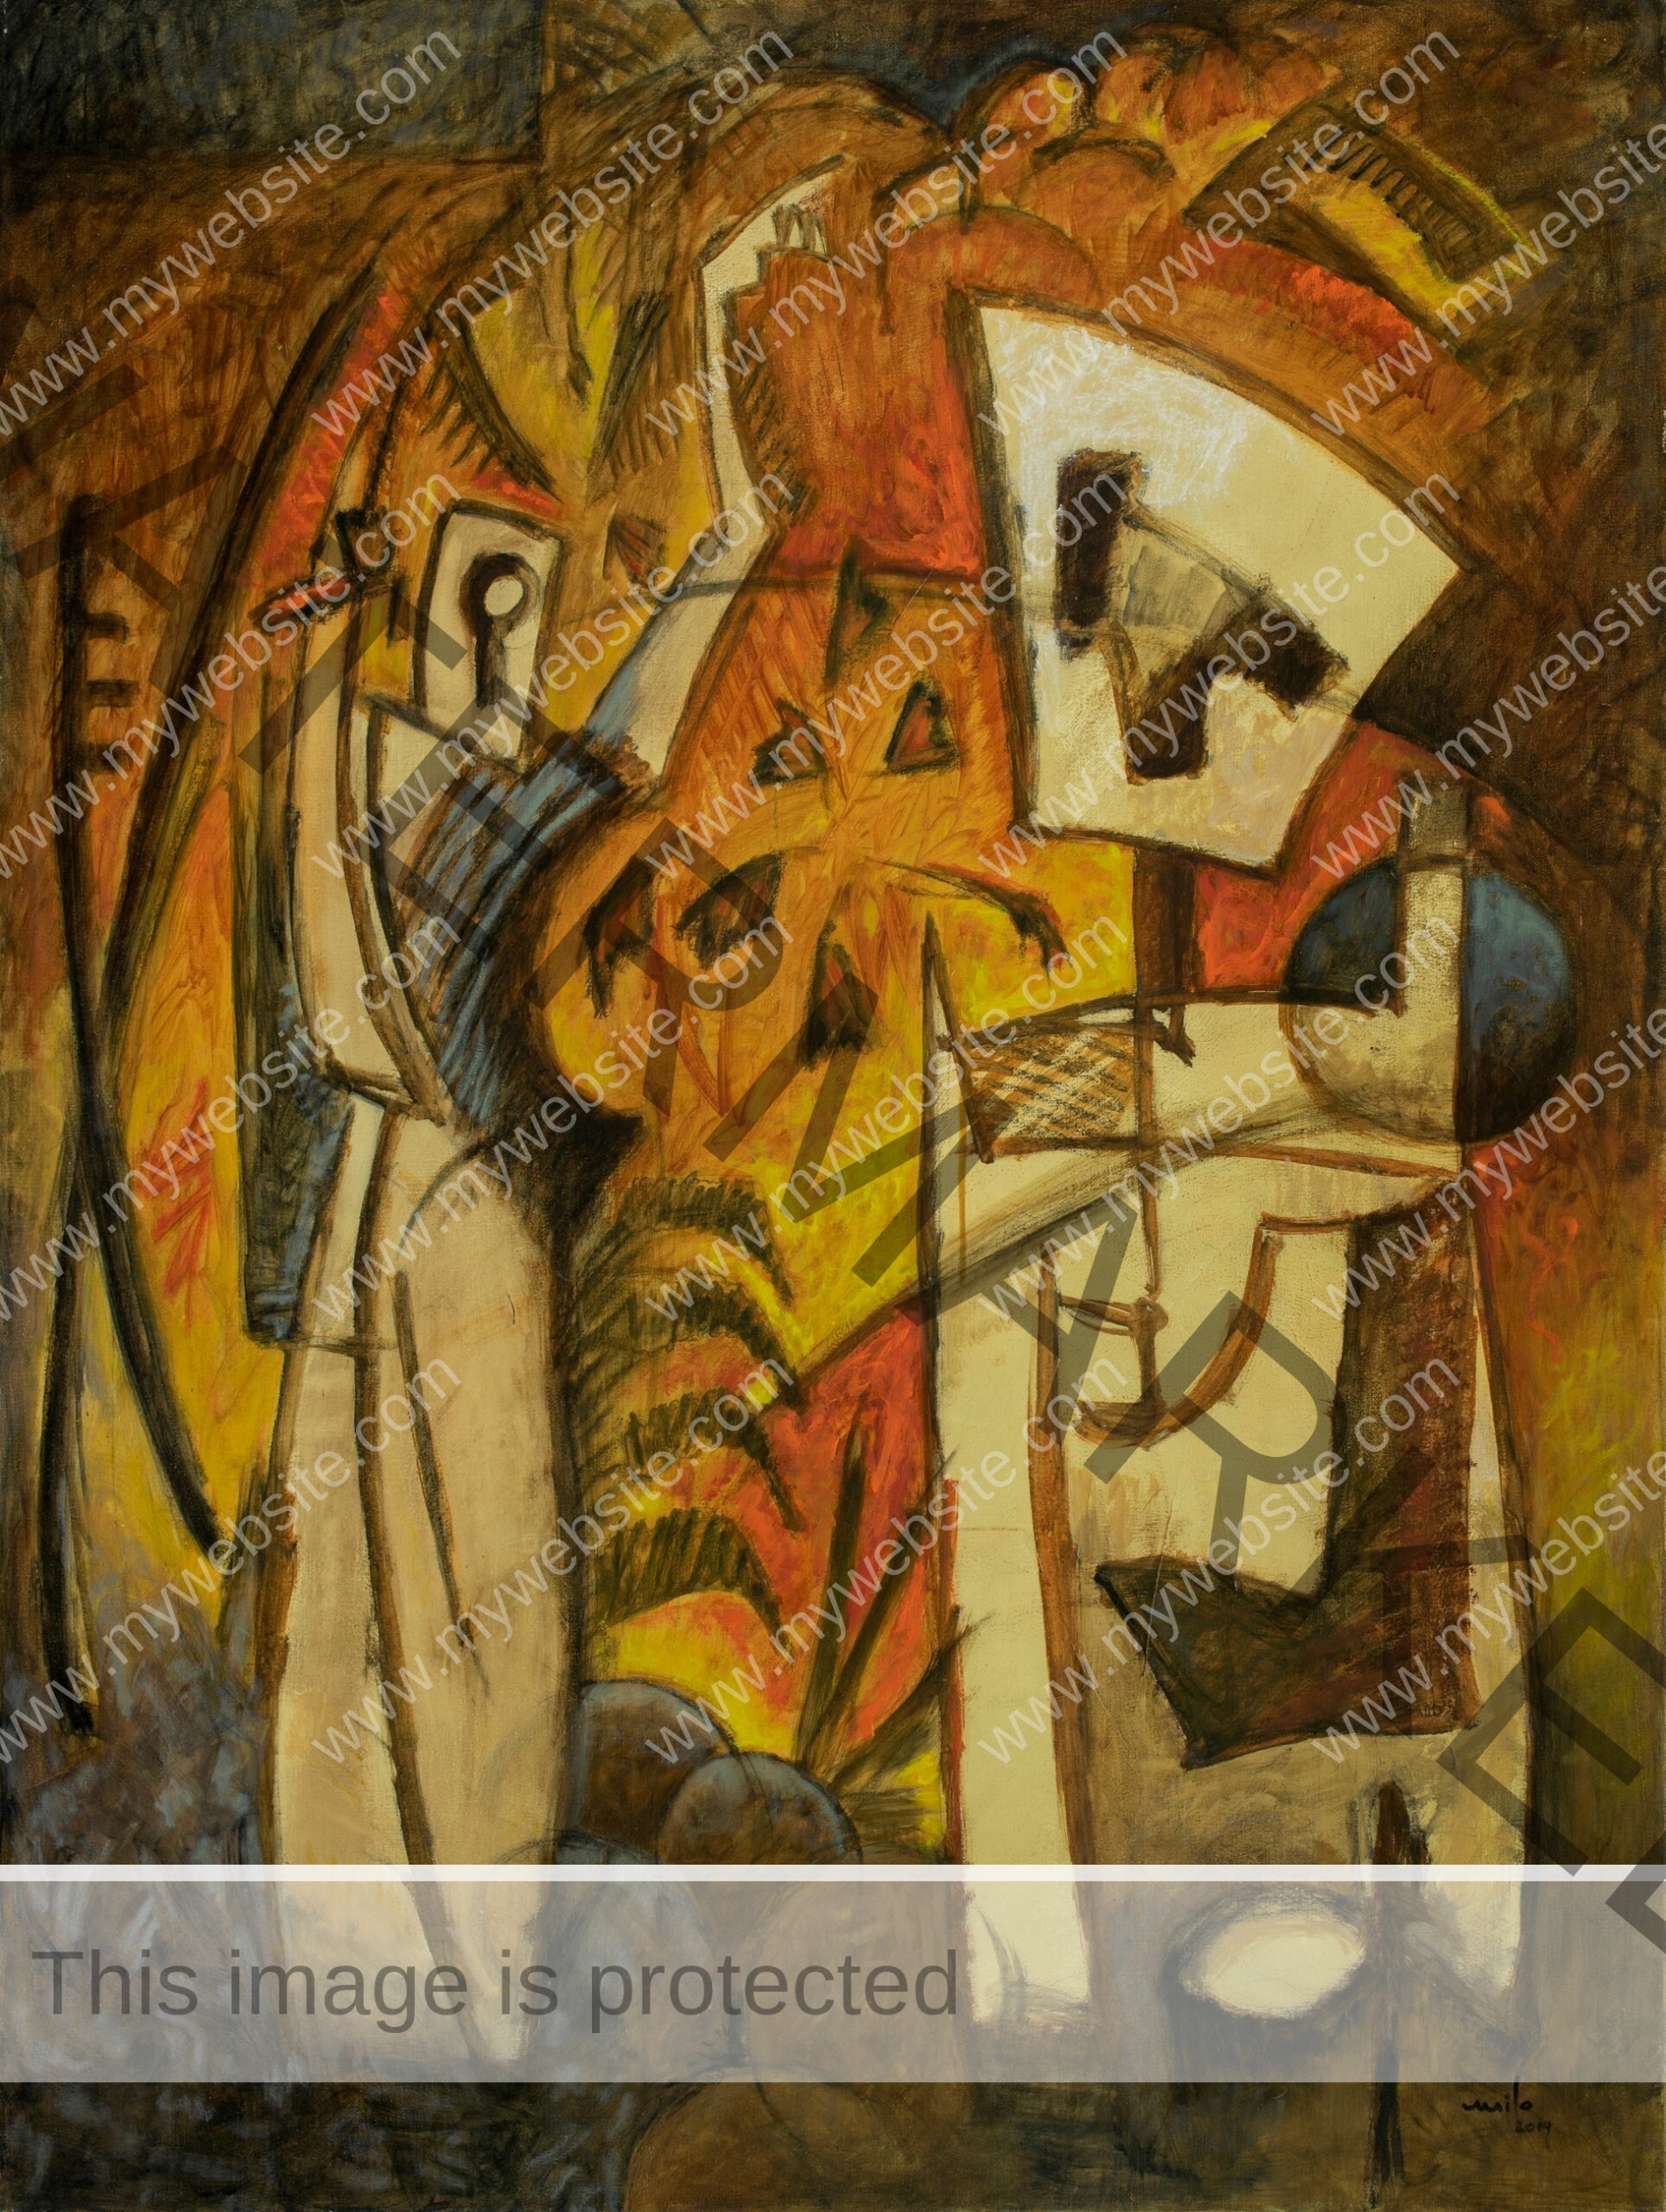 Mystical worship painting by Milo Gonzalez featuring a chaotic composition of lines and shapes, portraying two figures who appear to be at a religious gathering. The bright yellow and orange tones that surround the figures evokes emotion and mysticism.